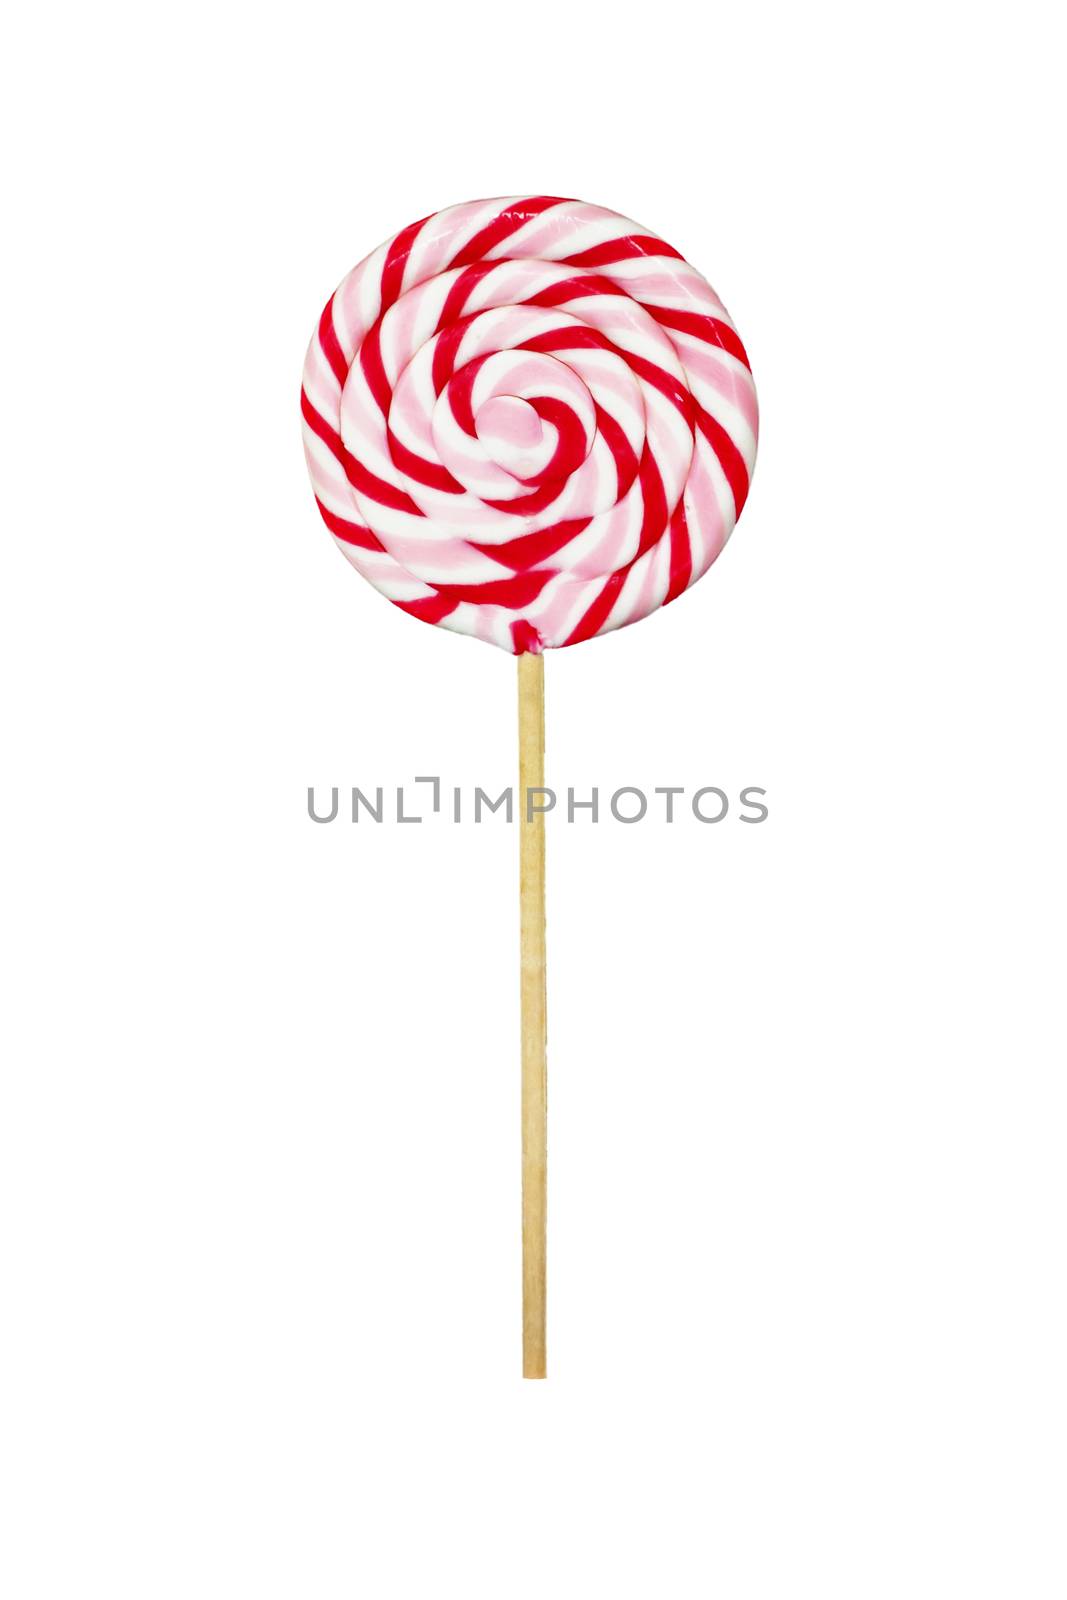 Colorful lolipop isolated on plain white background, wooden stick, red, rose and white spiral, childhood sweets, also unhealthy junk food concept